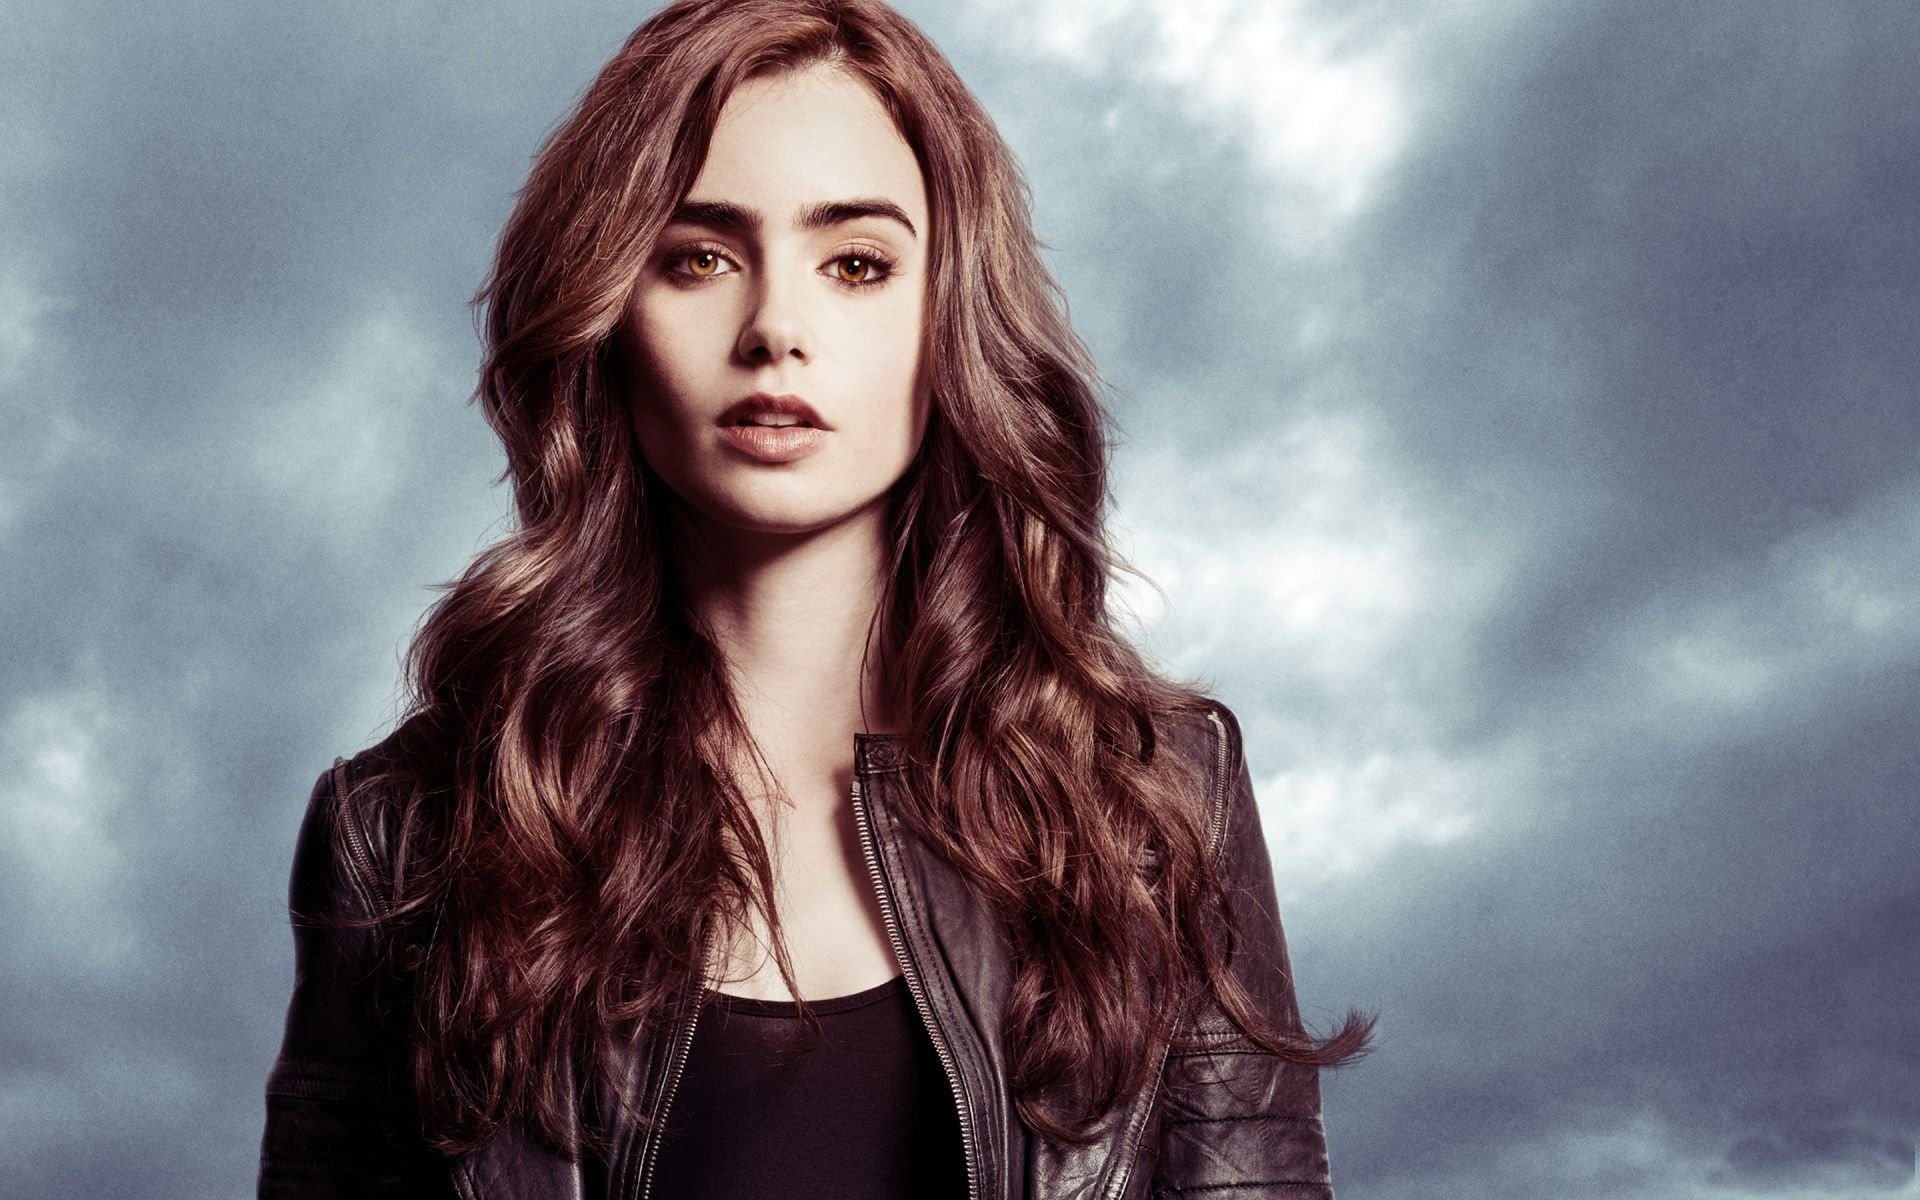 Lily Collins beautiful wallpapers #18 - 1920x1200